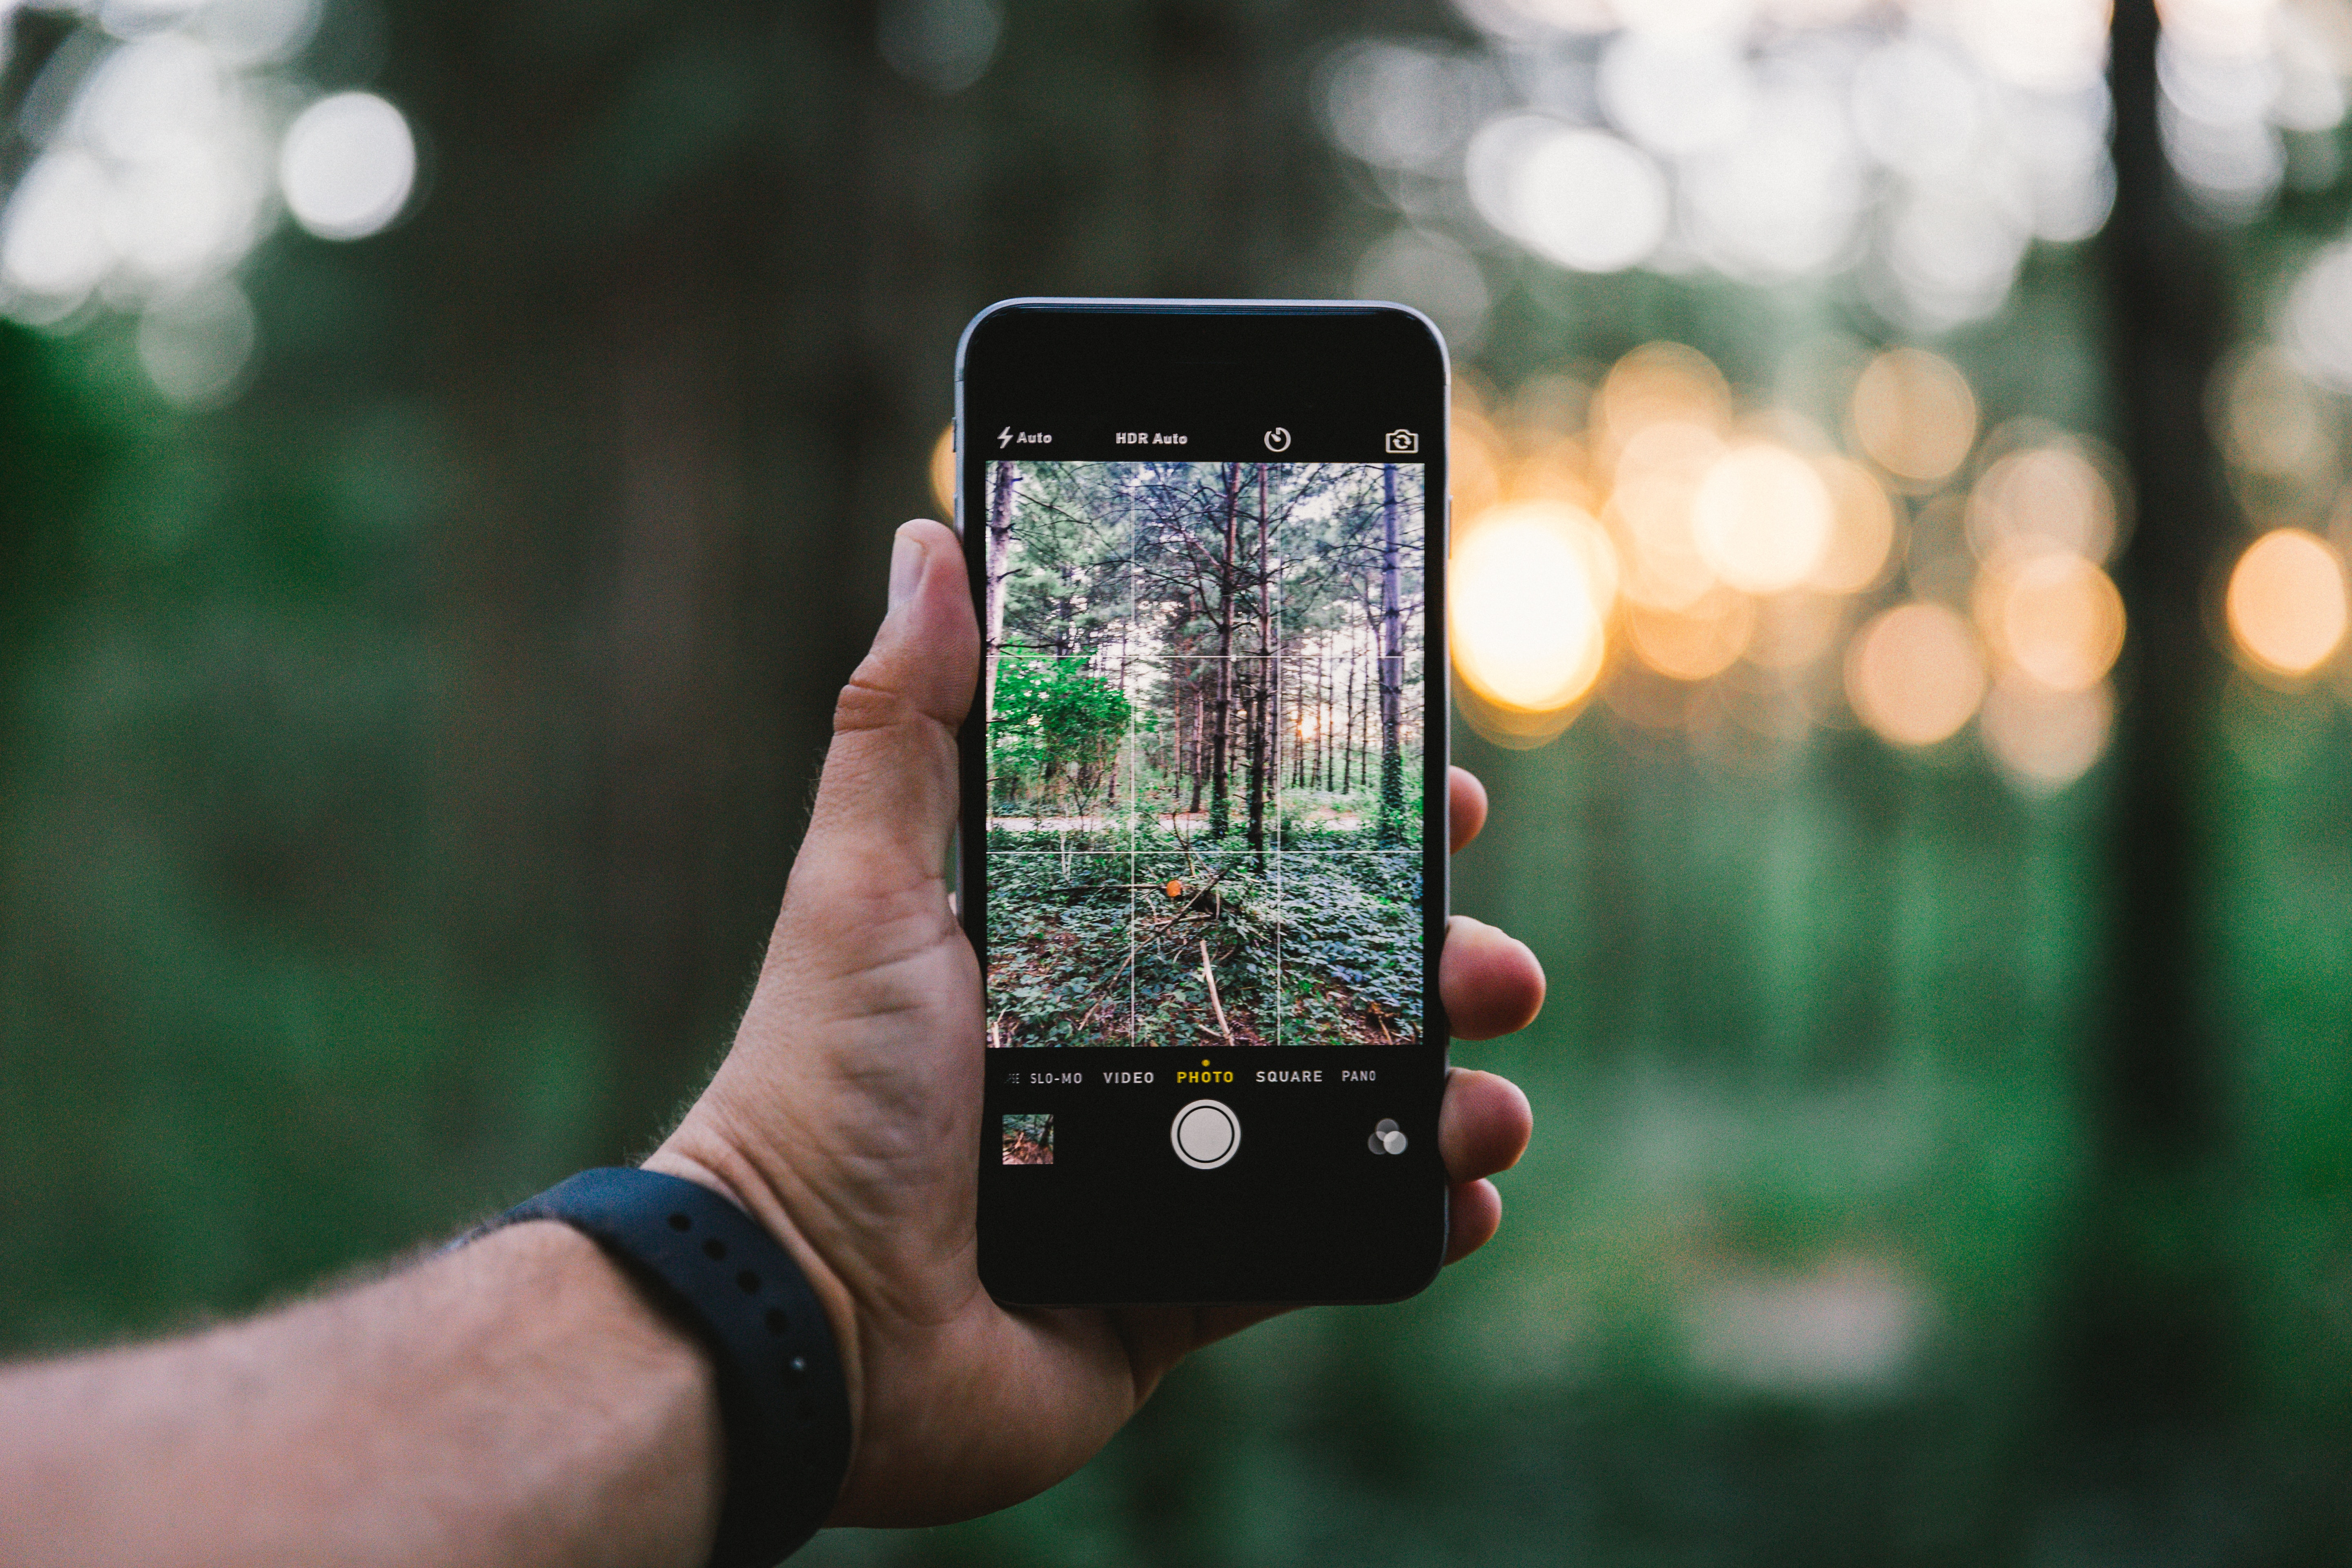 Taking a picture of the forest with a smartphone for social media marketing